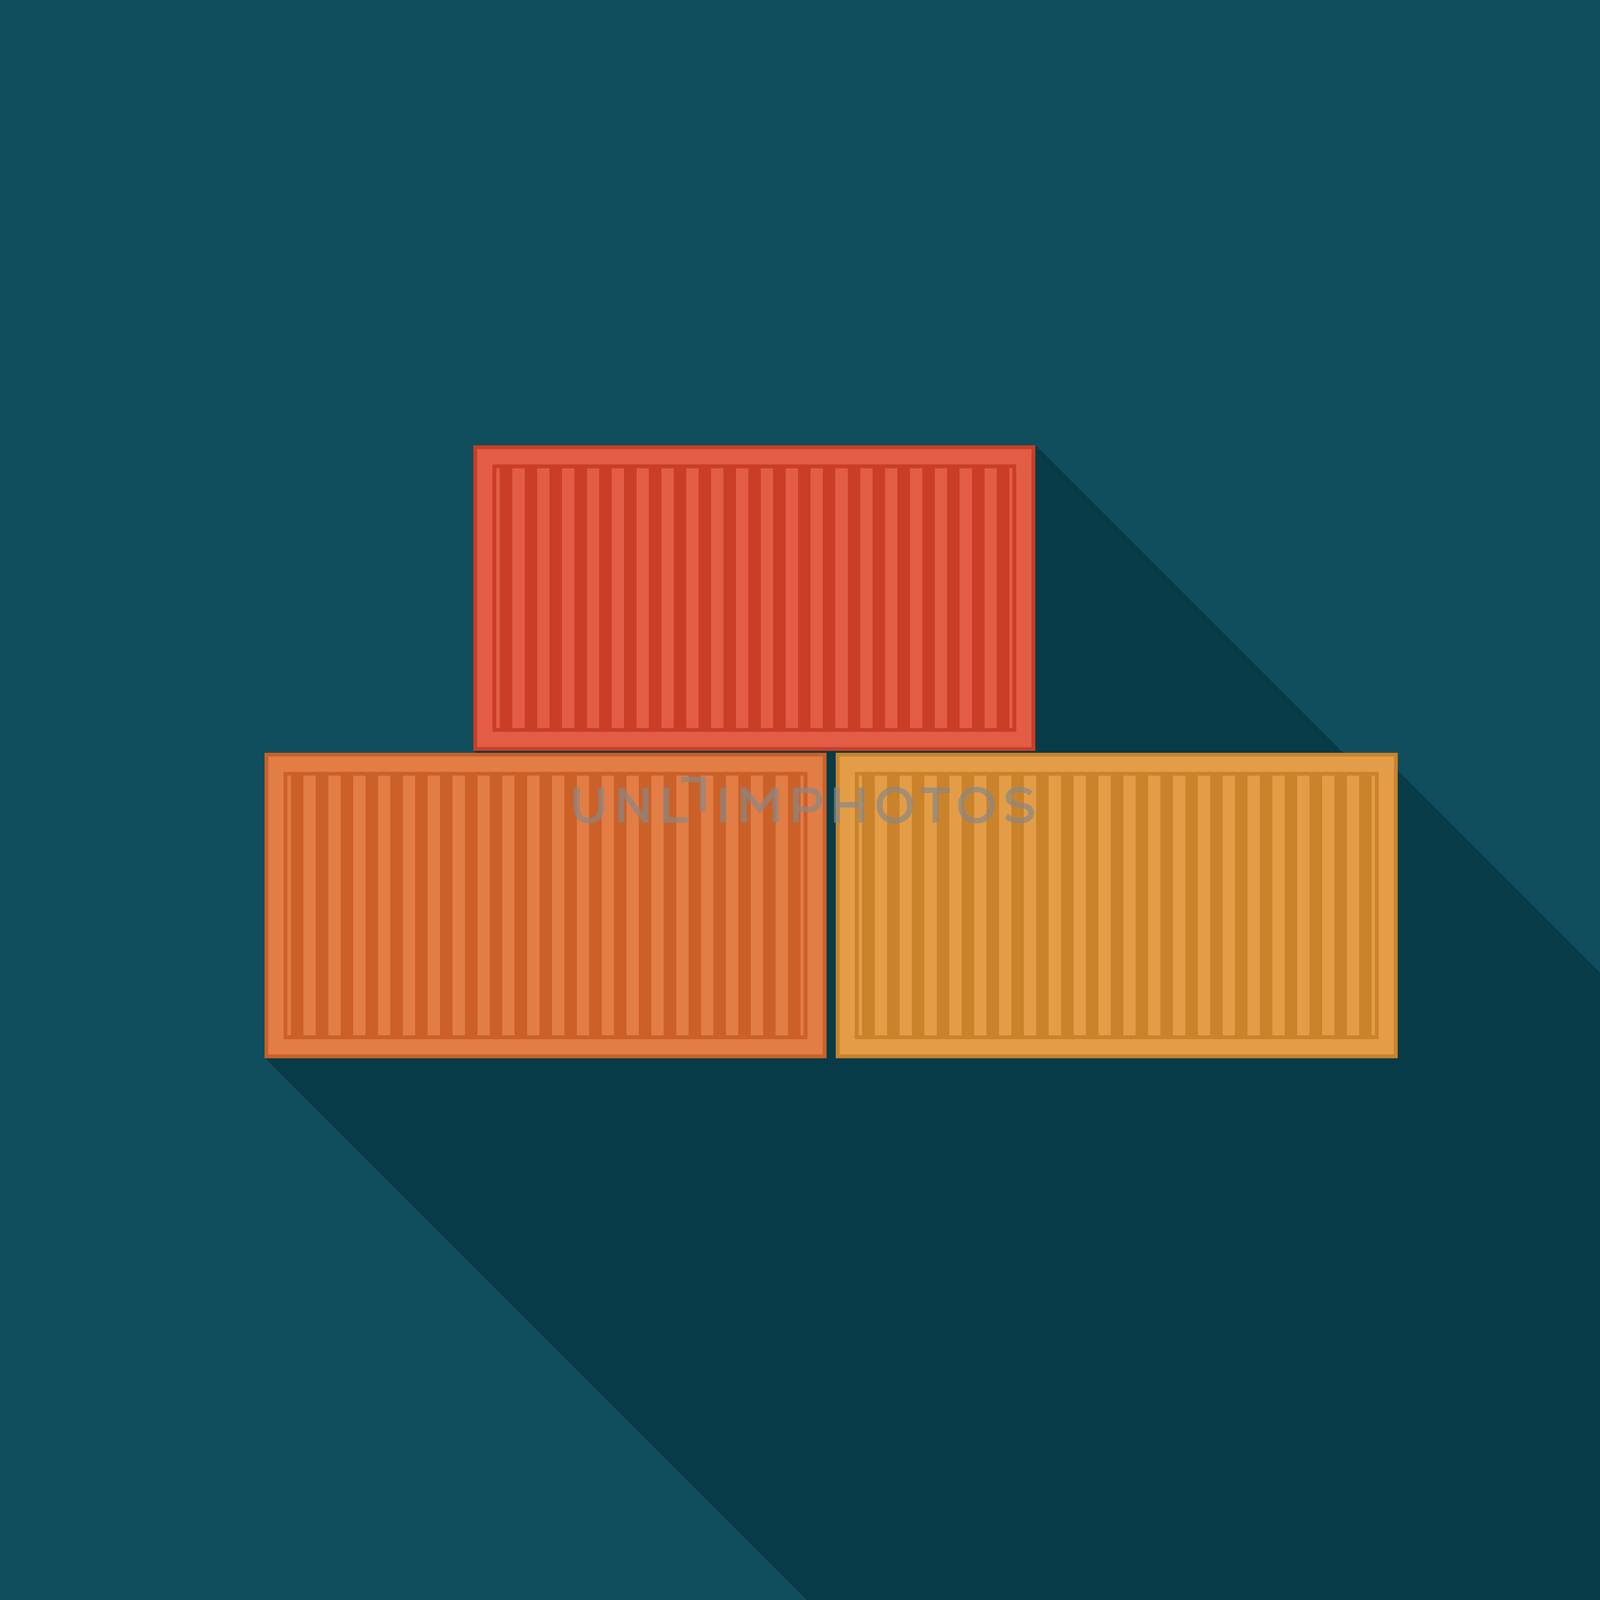 Vector illustration. Flat cargo container. Packaging Post service and delivery concept icon by Lemon_workshop